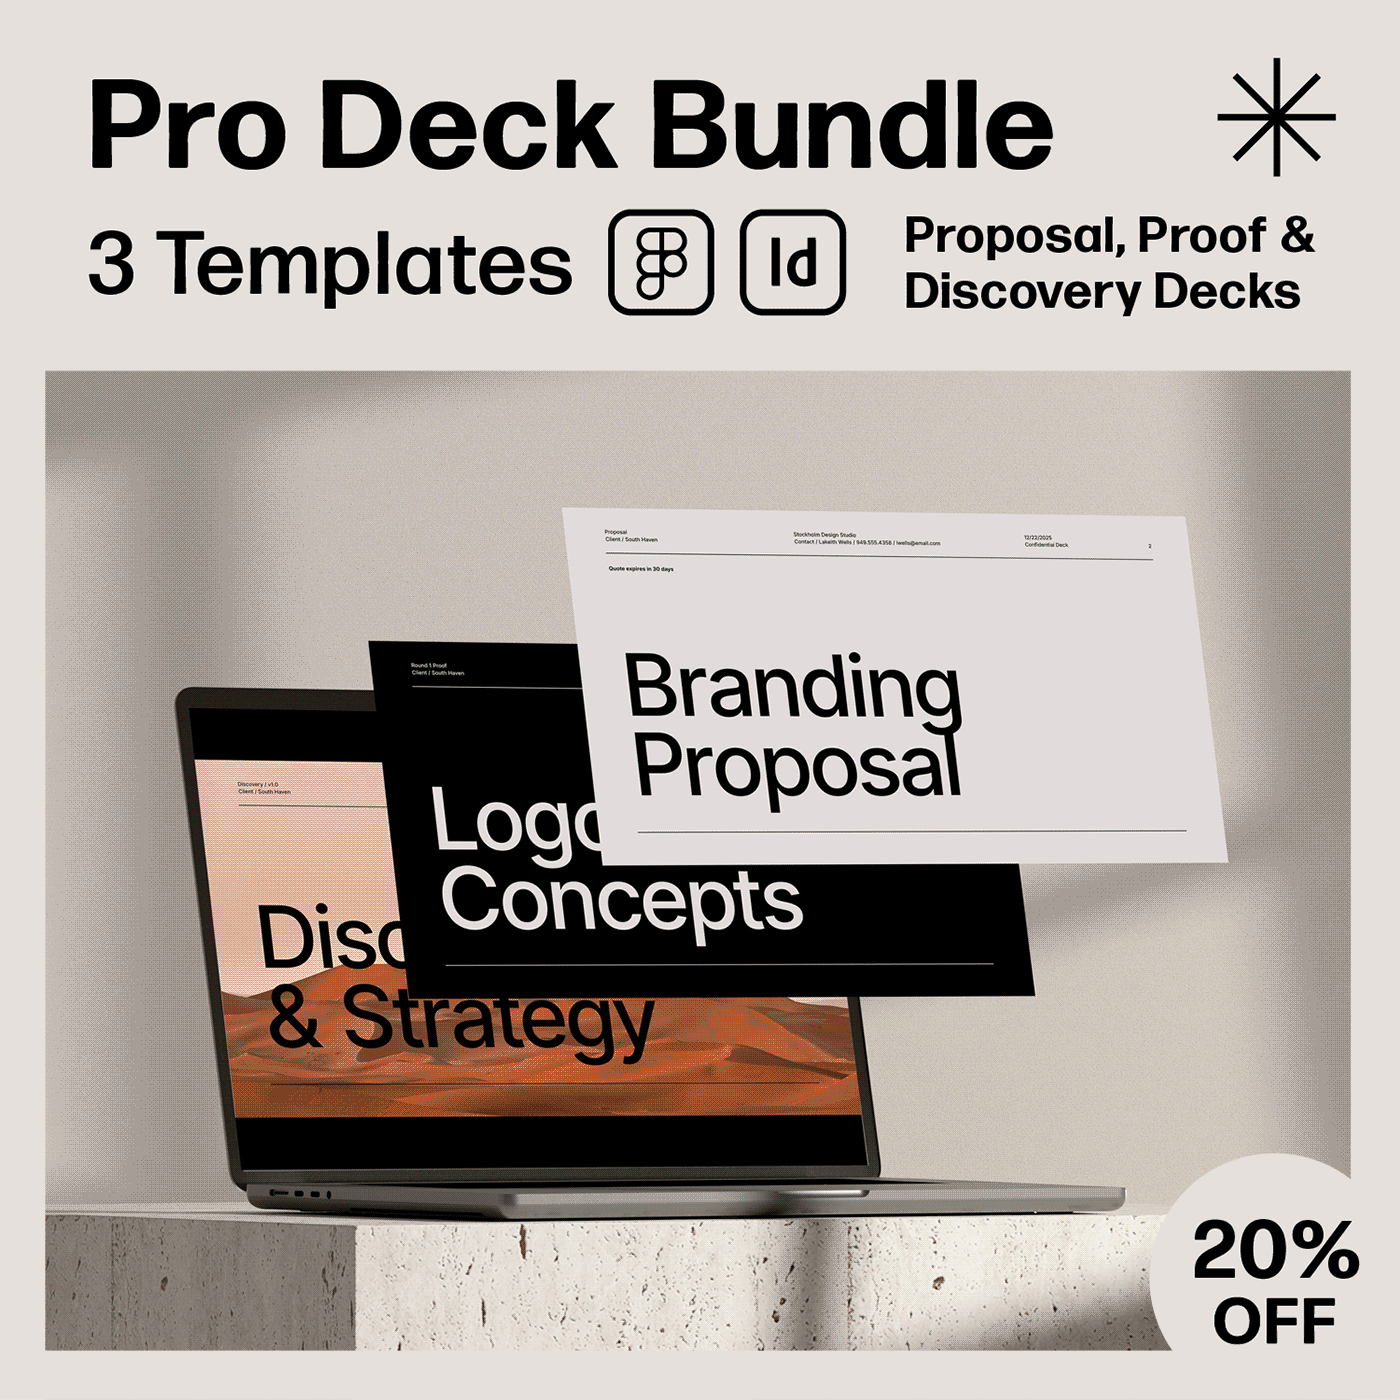 the Proposal Deck, Discovery Deck, and Proof Deck covers floating off a macbook pro screen